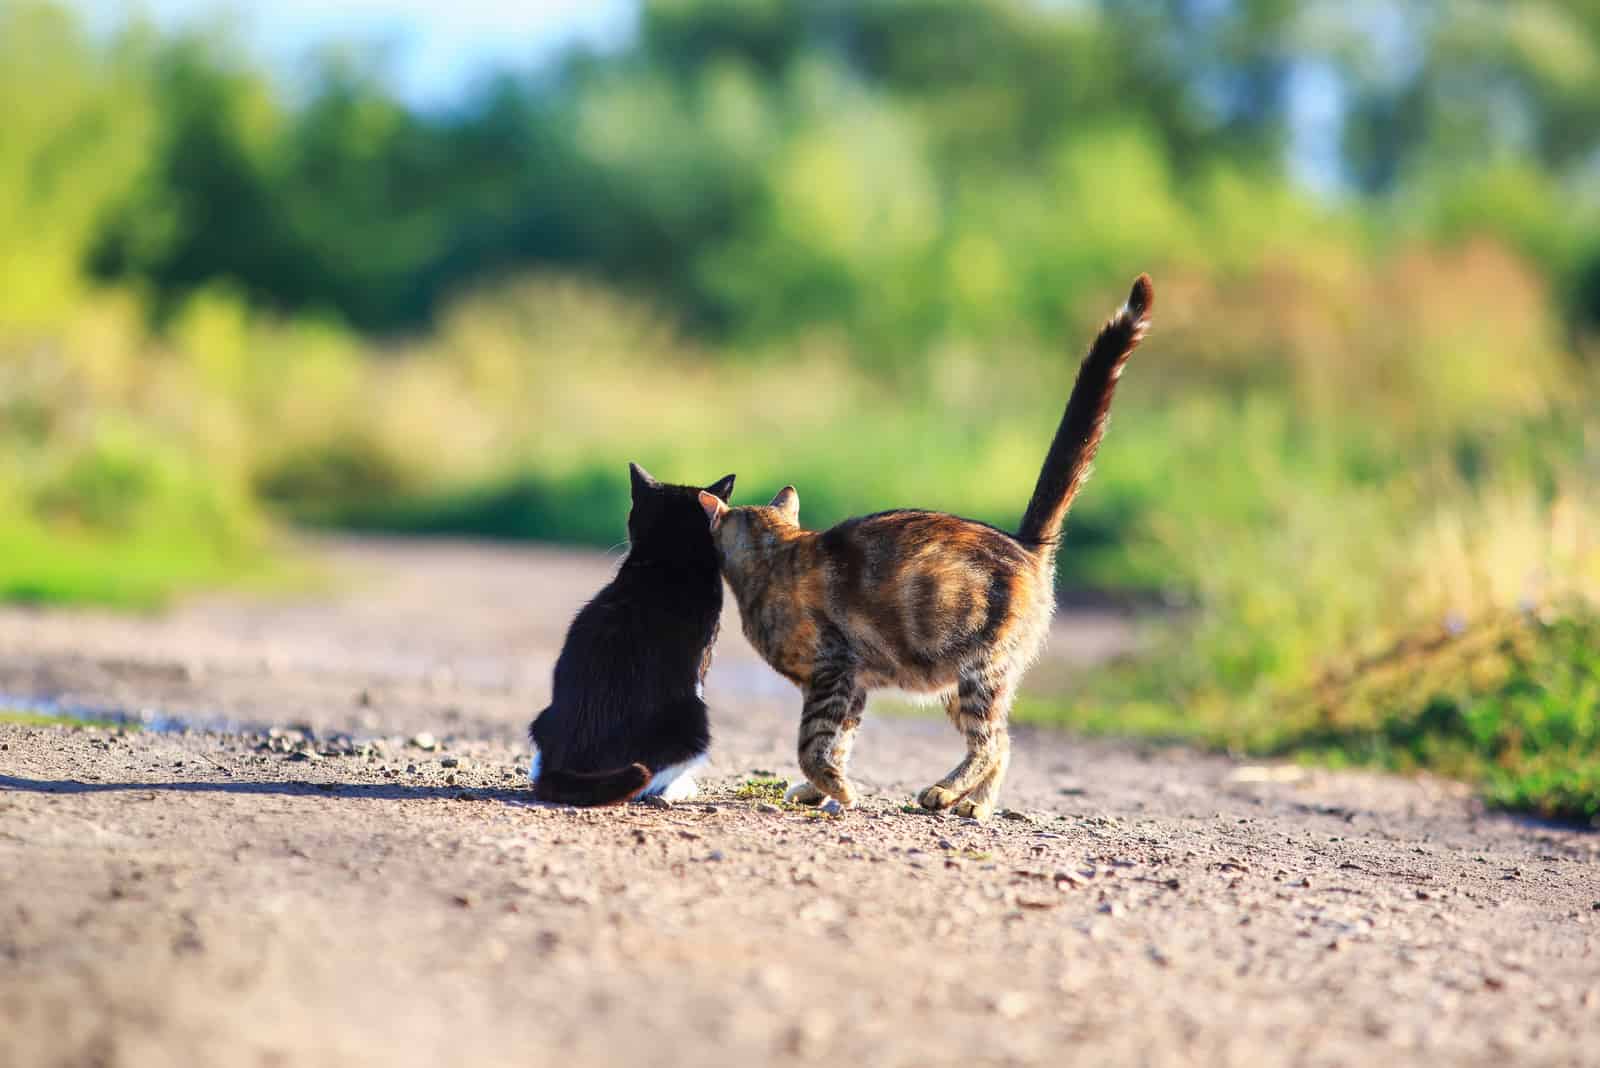 two cats are walking down the street